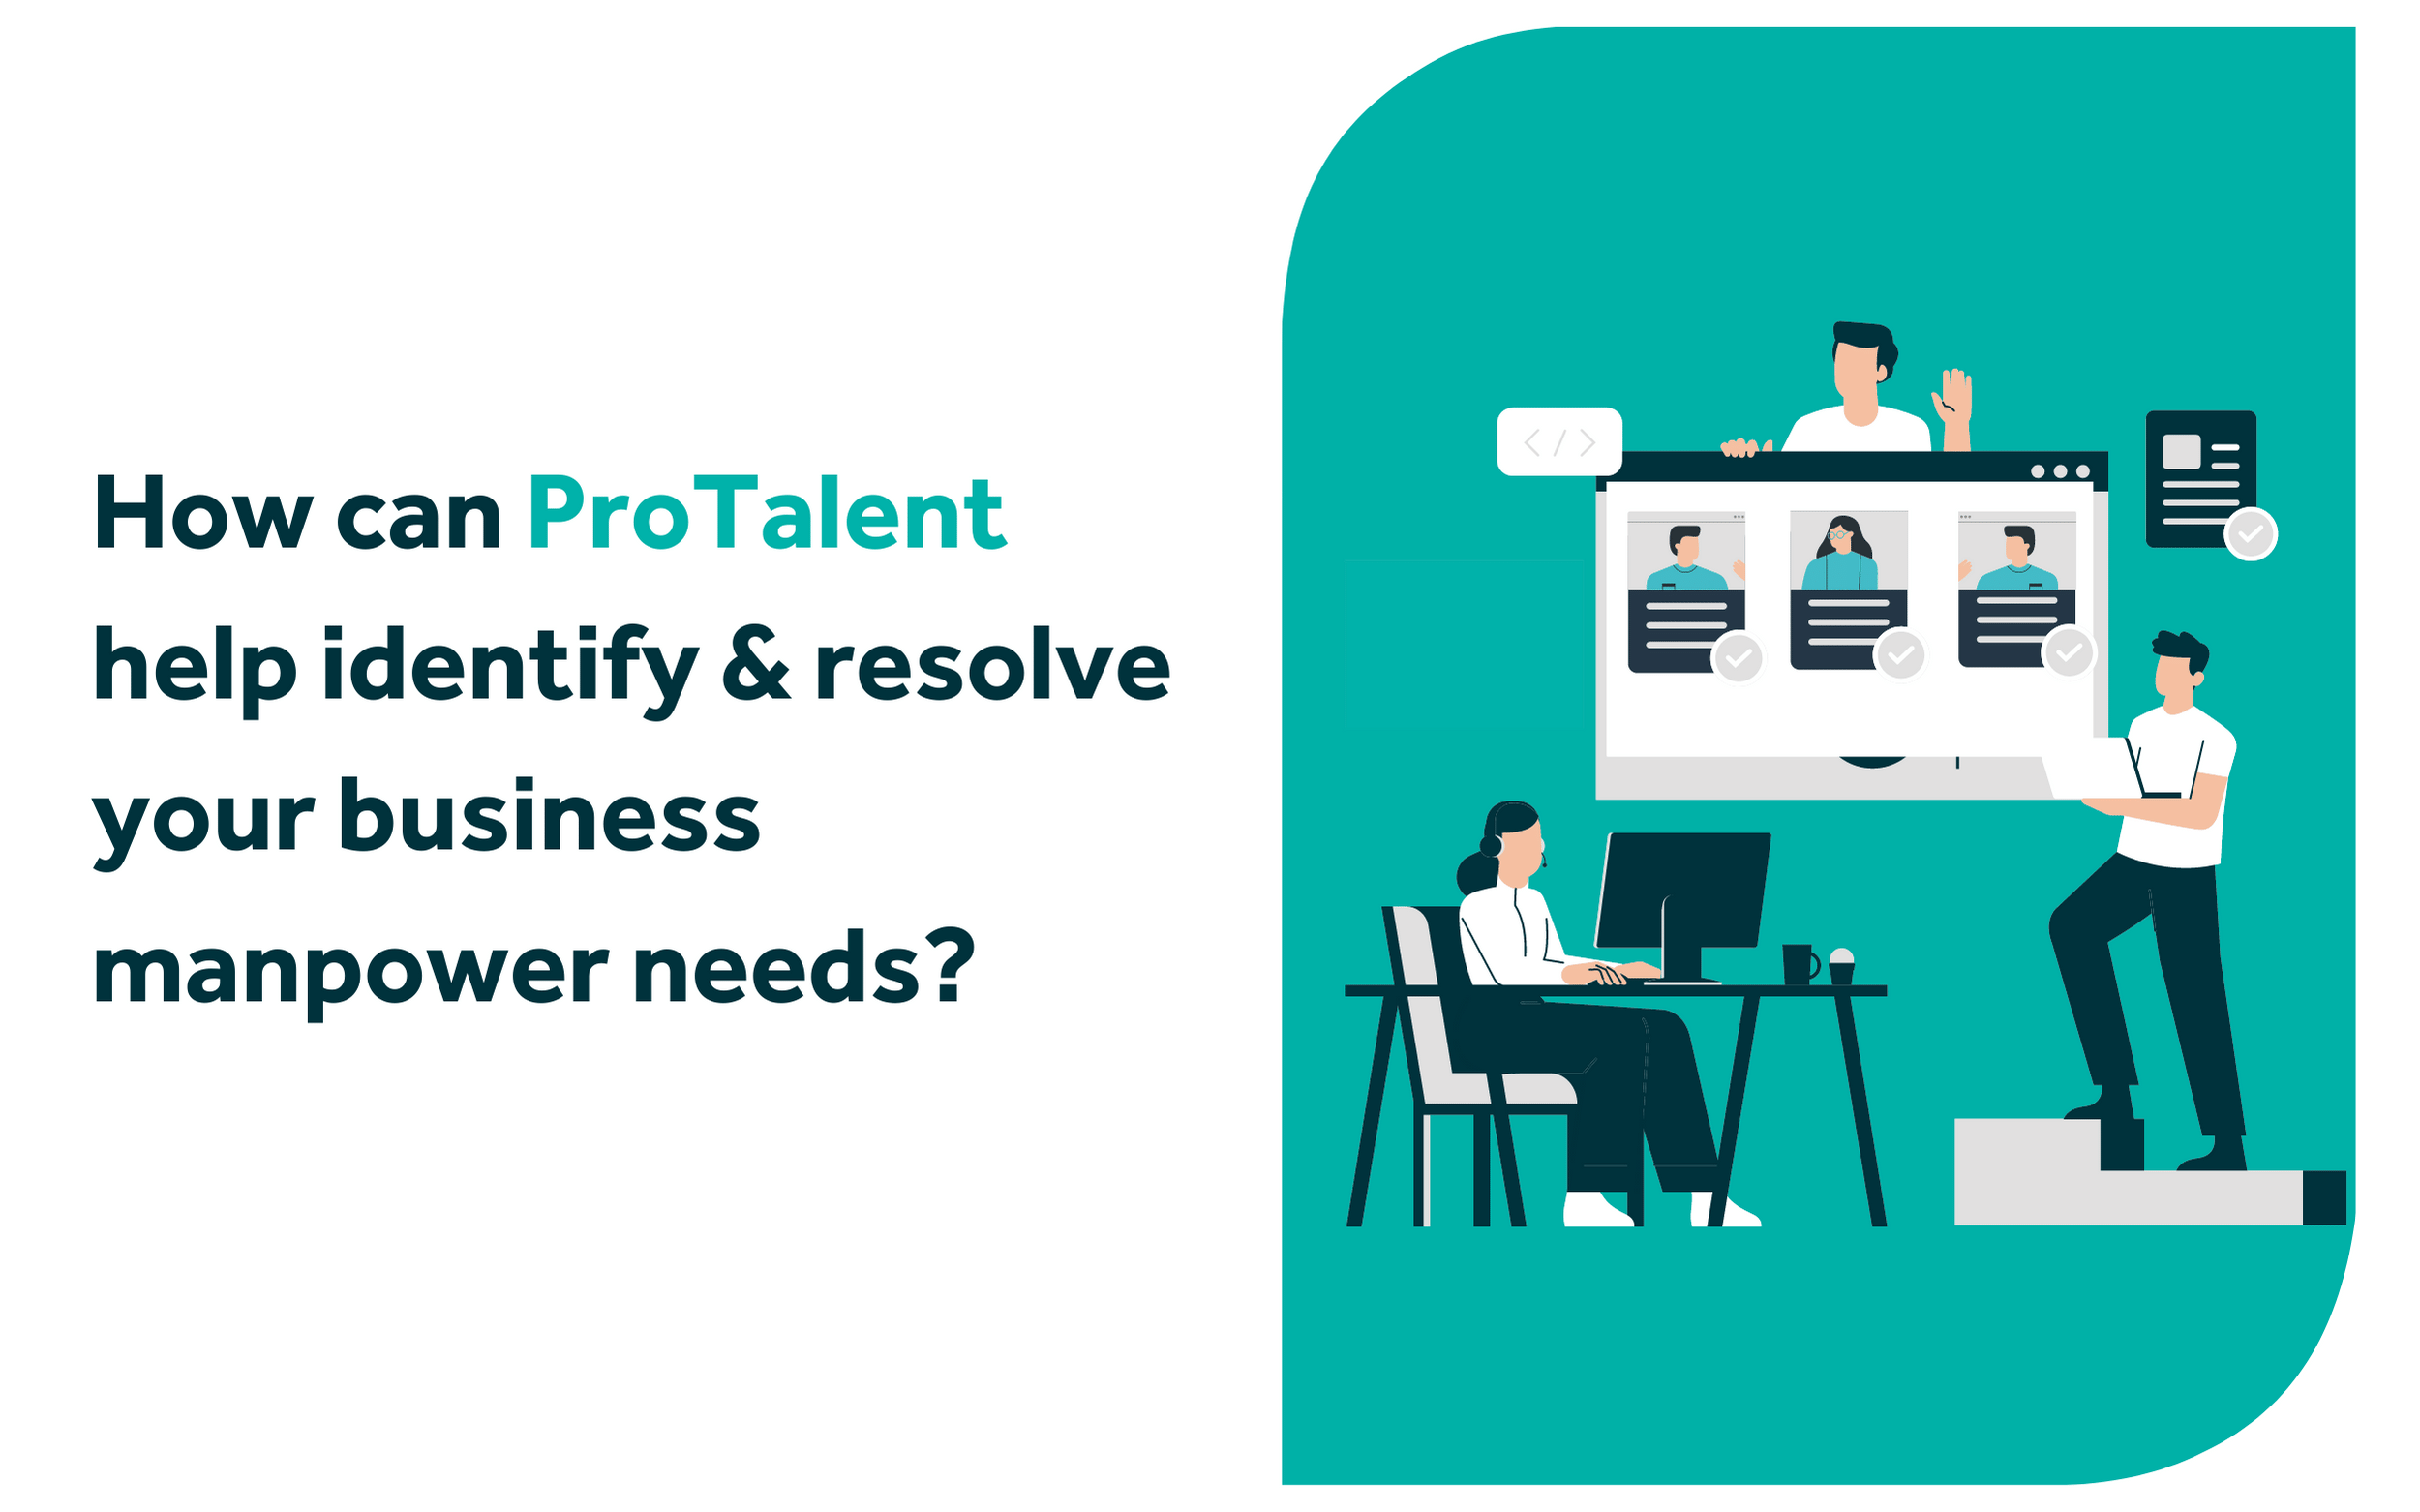 How can ProTalent help identify & resolve your business manpower needs